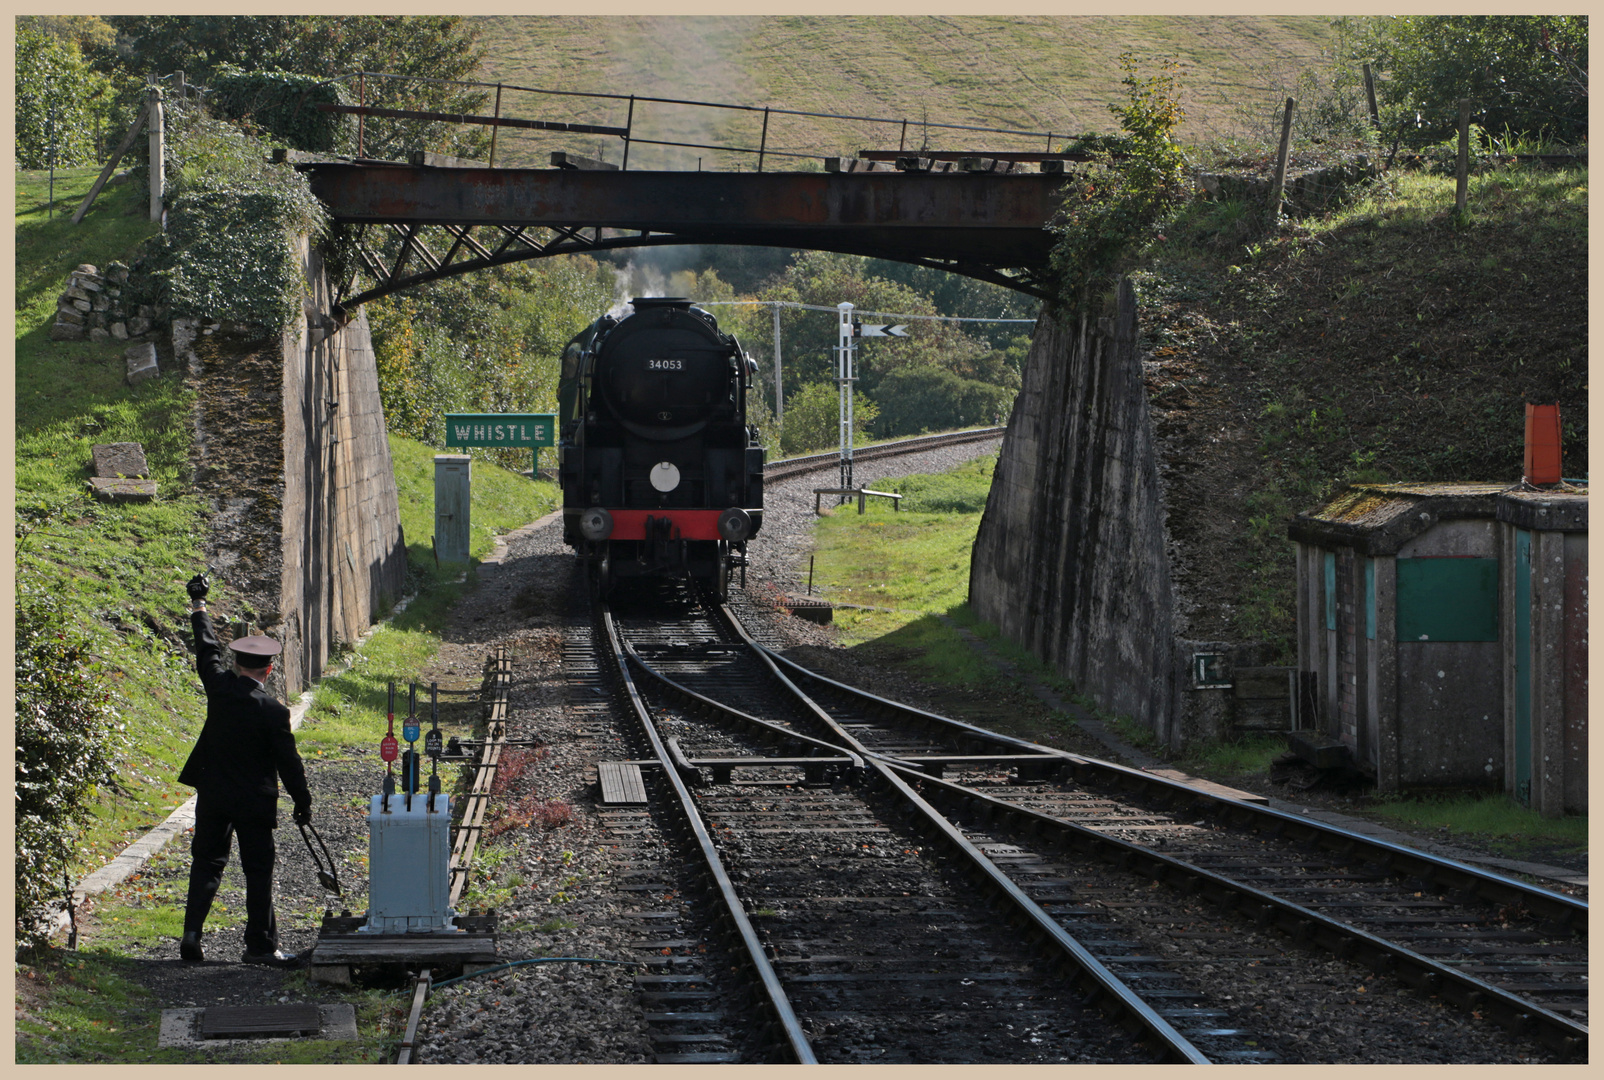 train at corfe castle station 2